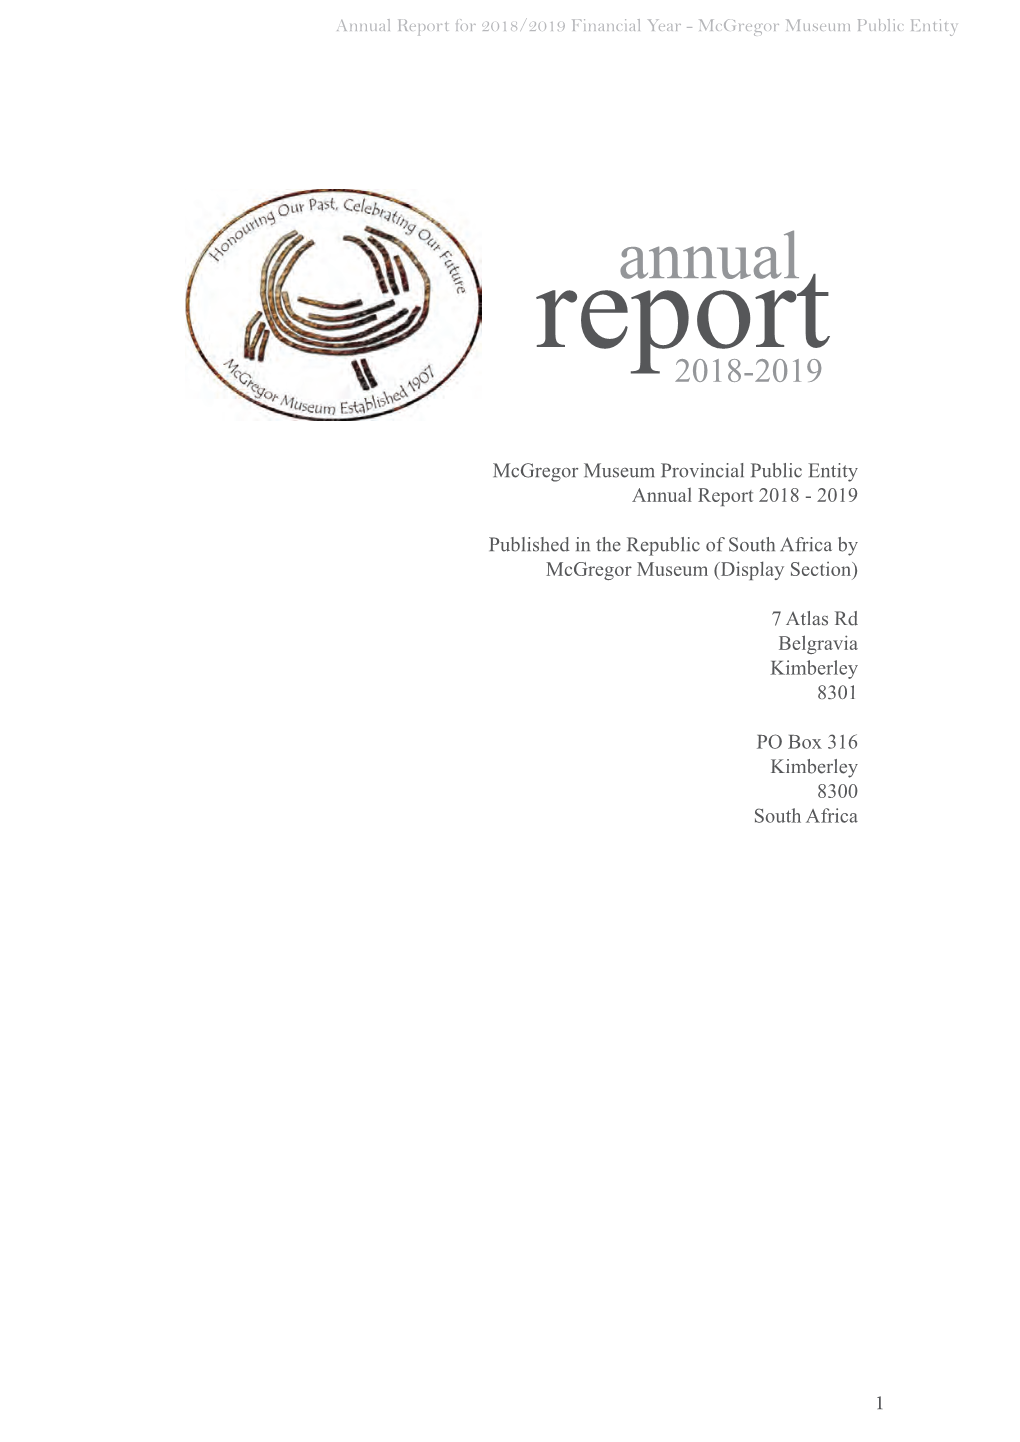 Annual Report for 2018/2019 Financial Year - Mcgregor Museum Public Entity